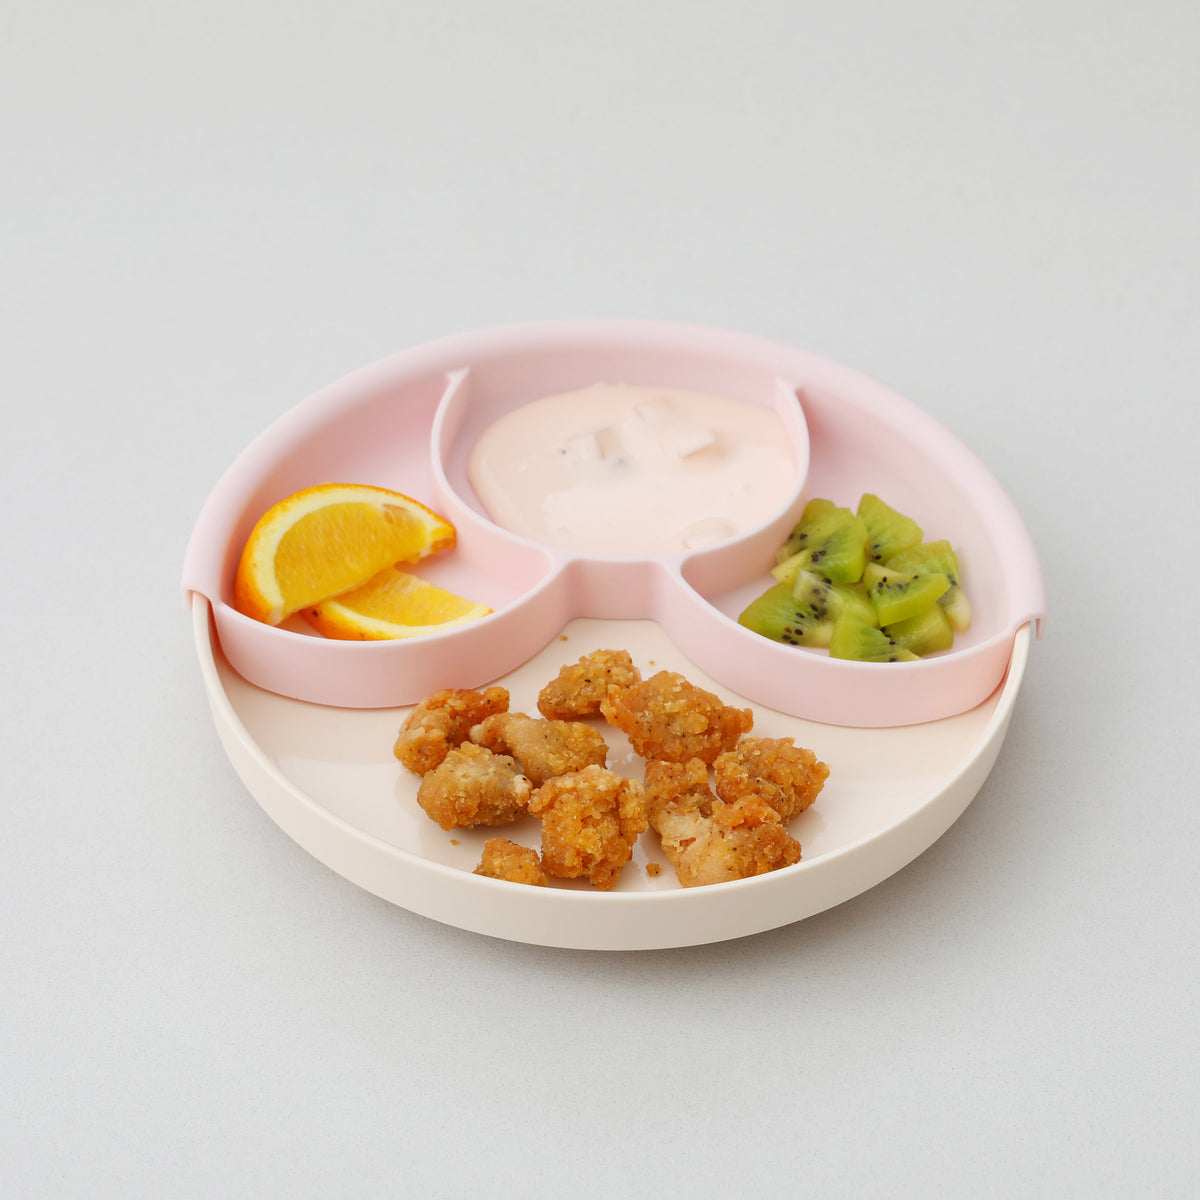 miniware-healthy-meal-set-pla-smart-divider-suction-plate-in-vanilla-+-silicone-divider-in-cotton-candy- (16)